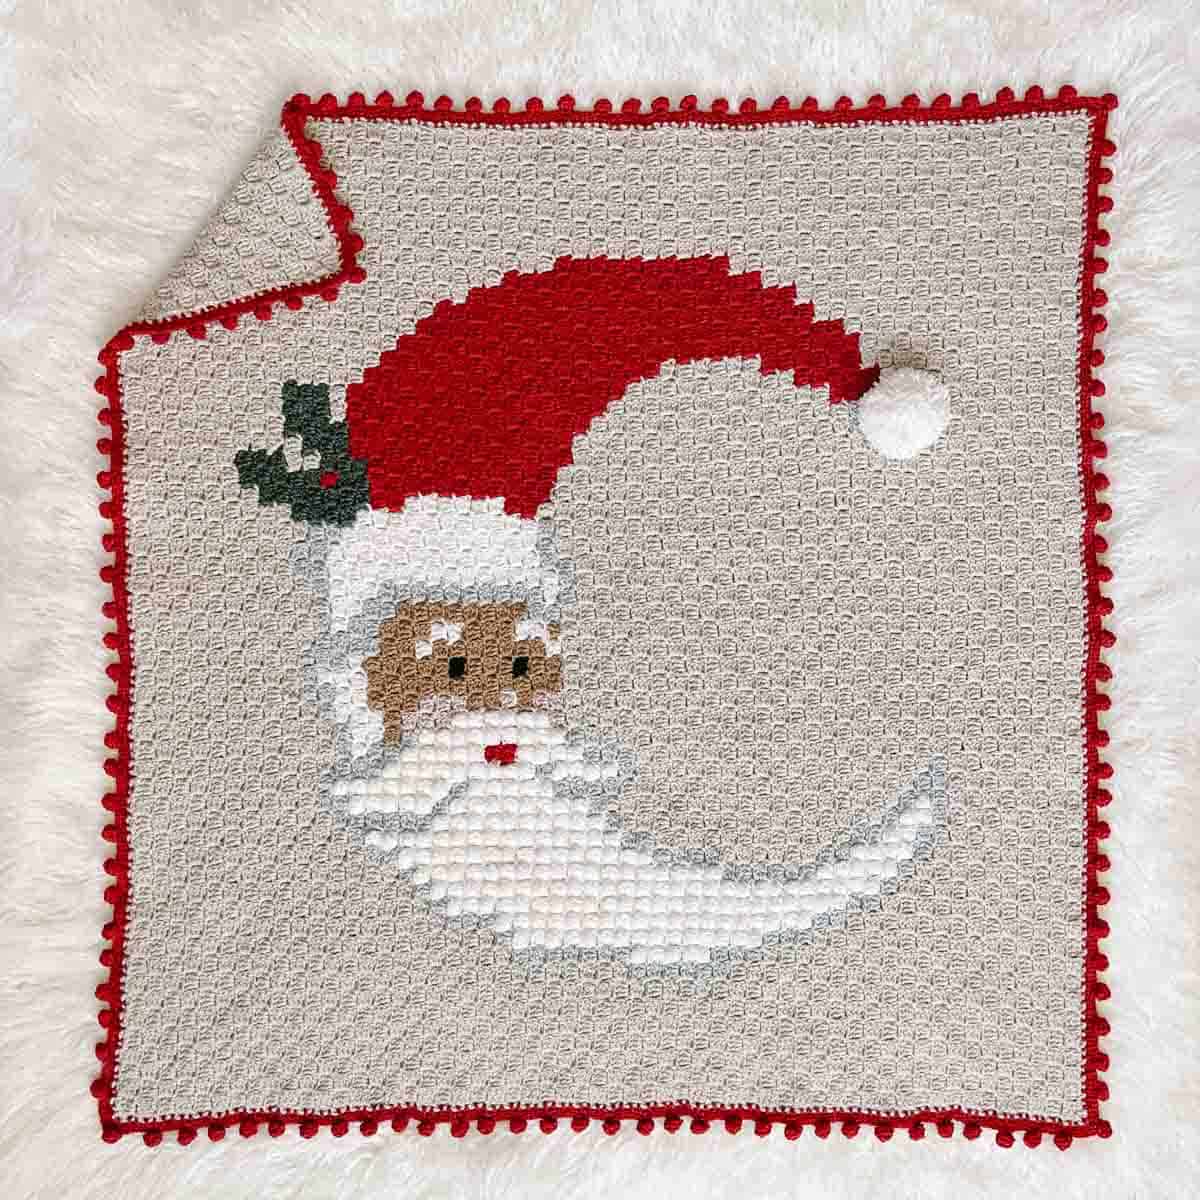 An overhead view of a c2c crochet blanket with a crescent-shaped Santa face.